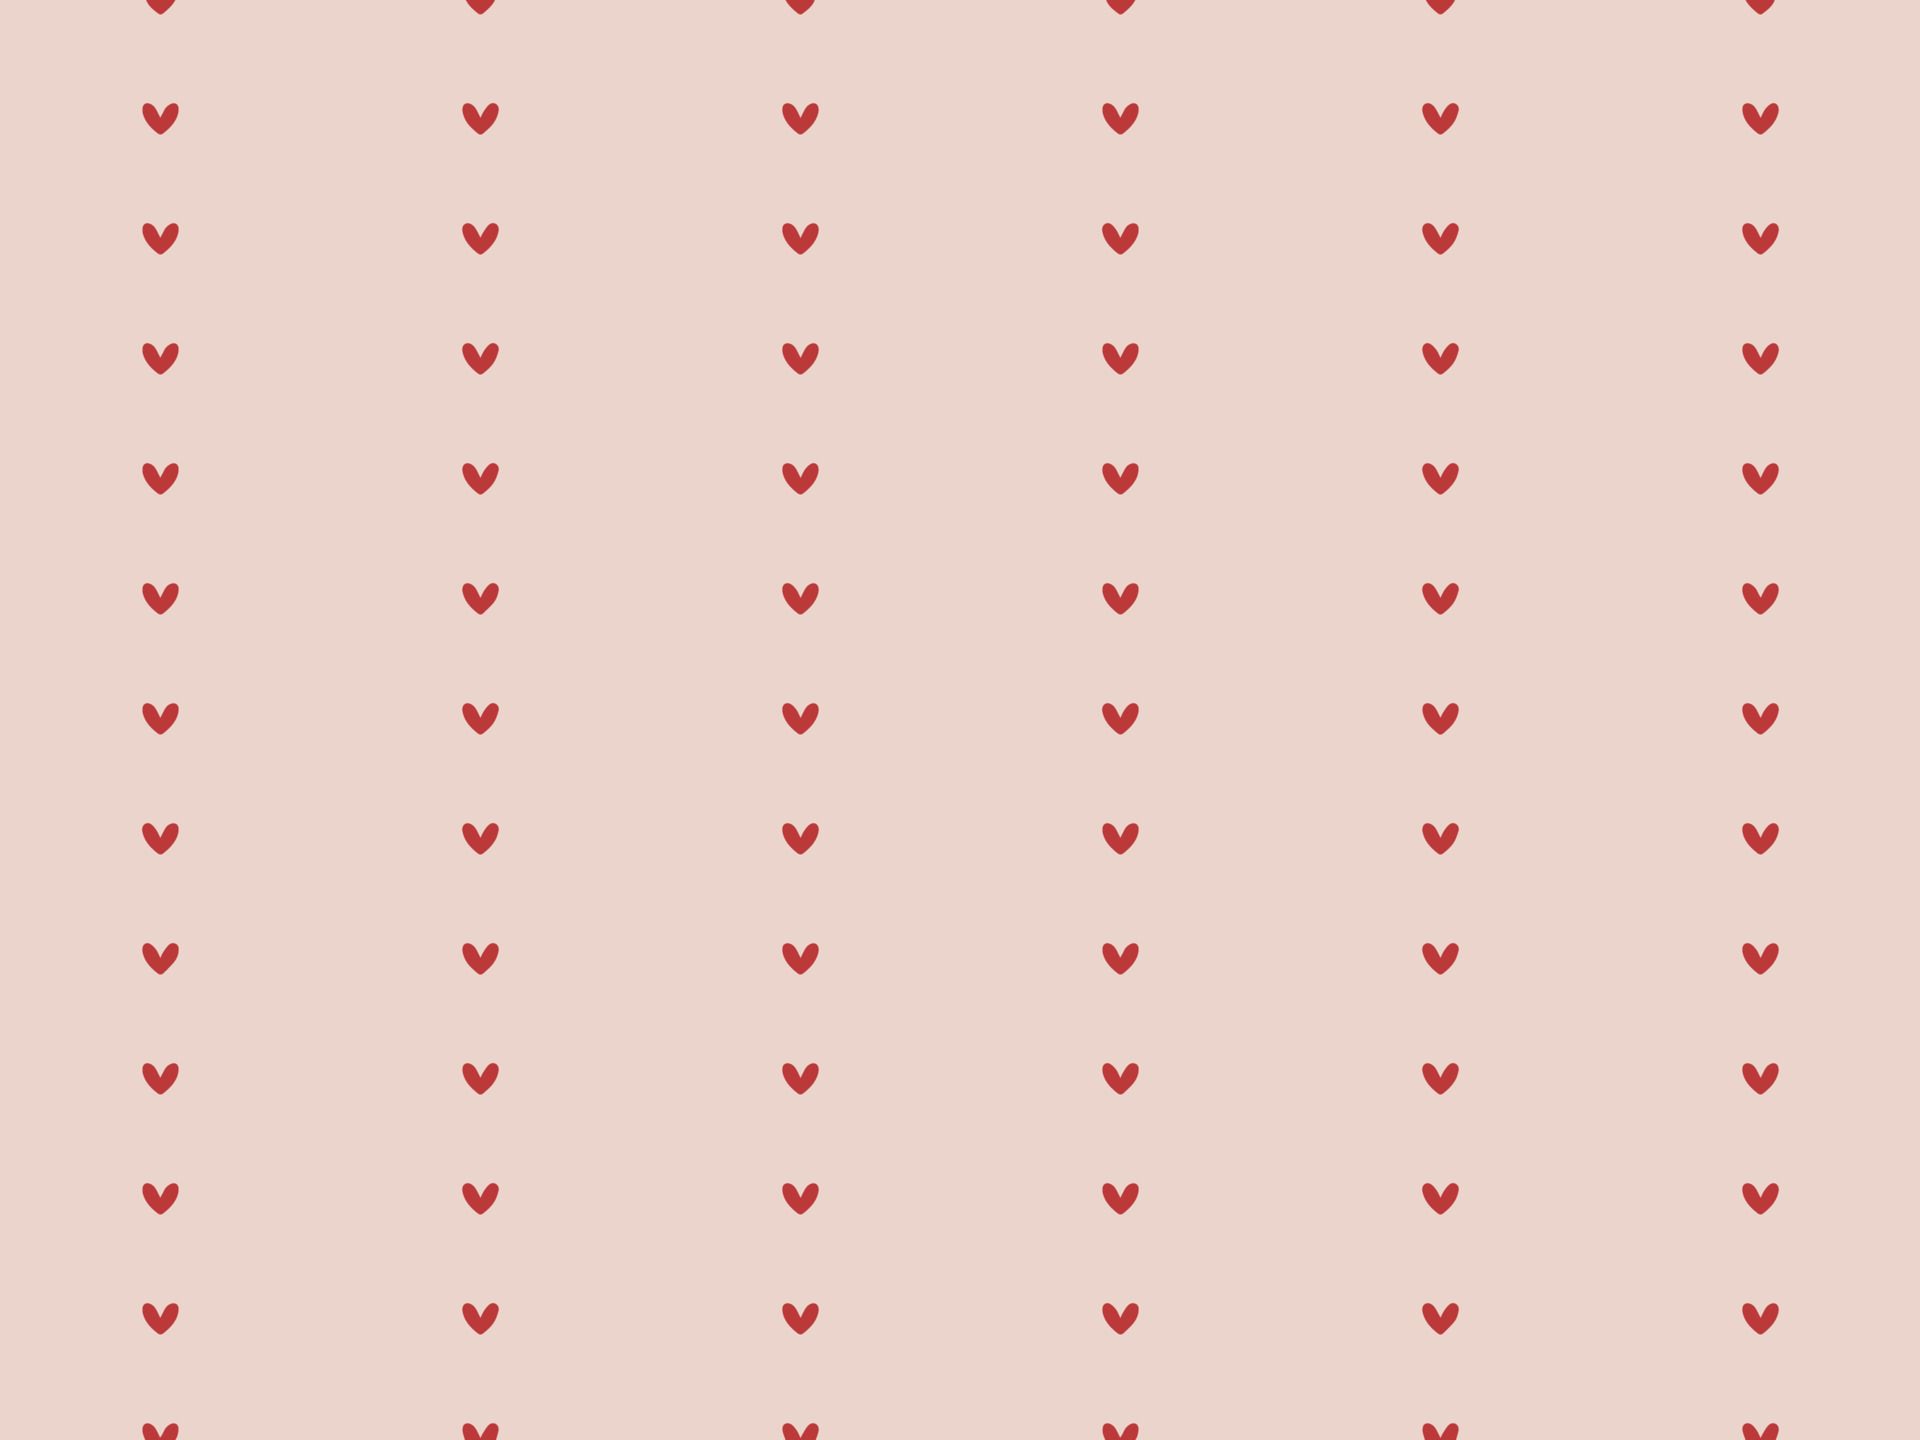 A pattern of red hearts on a pink background - Heart, pattern, love